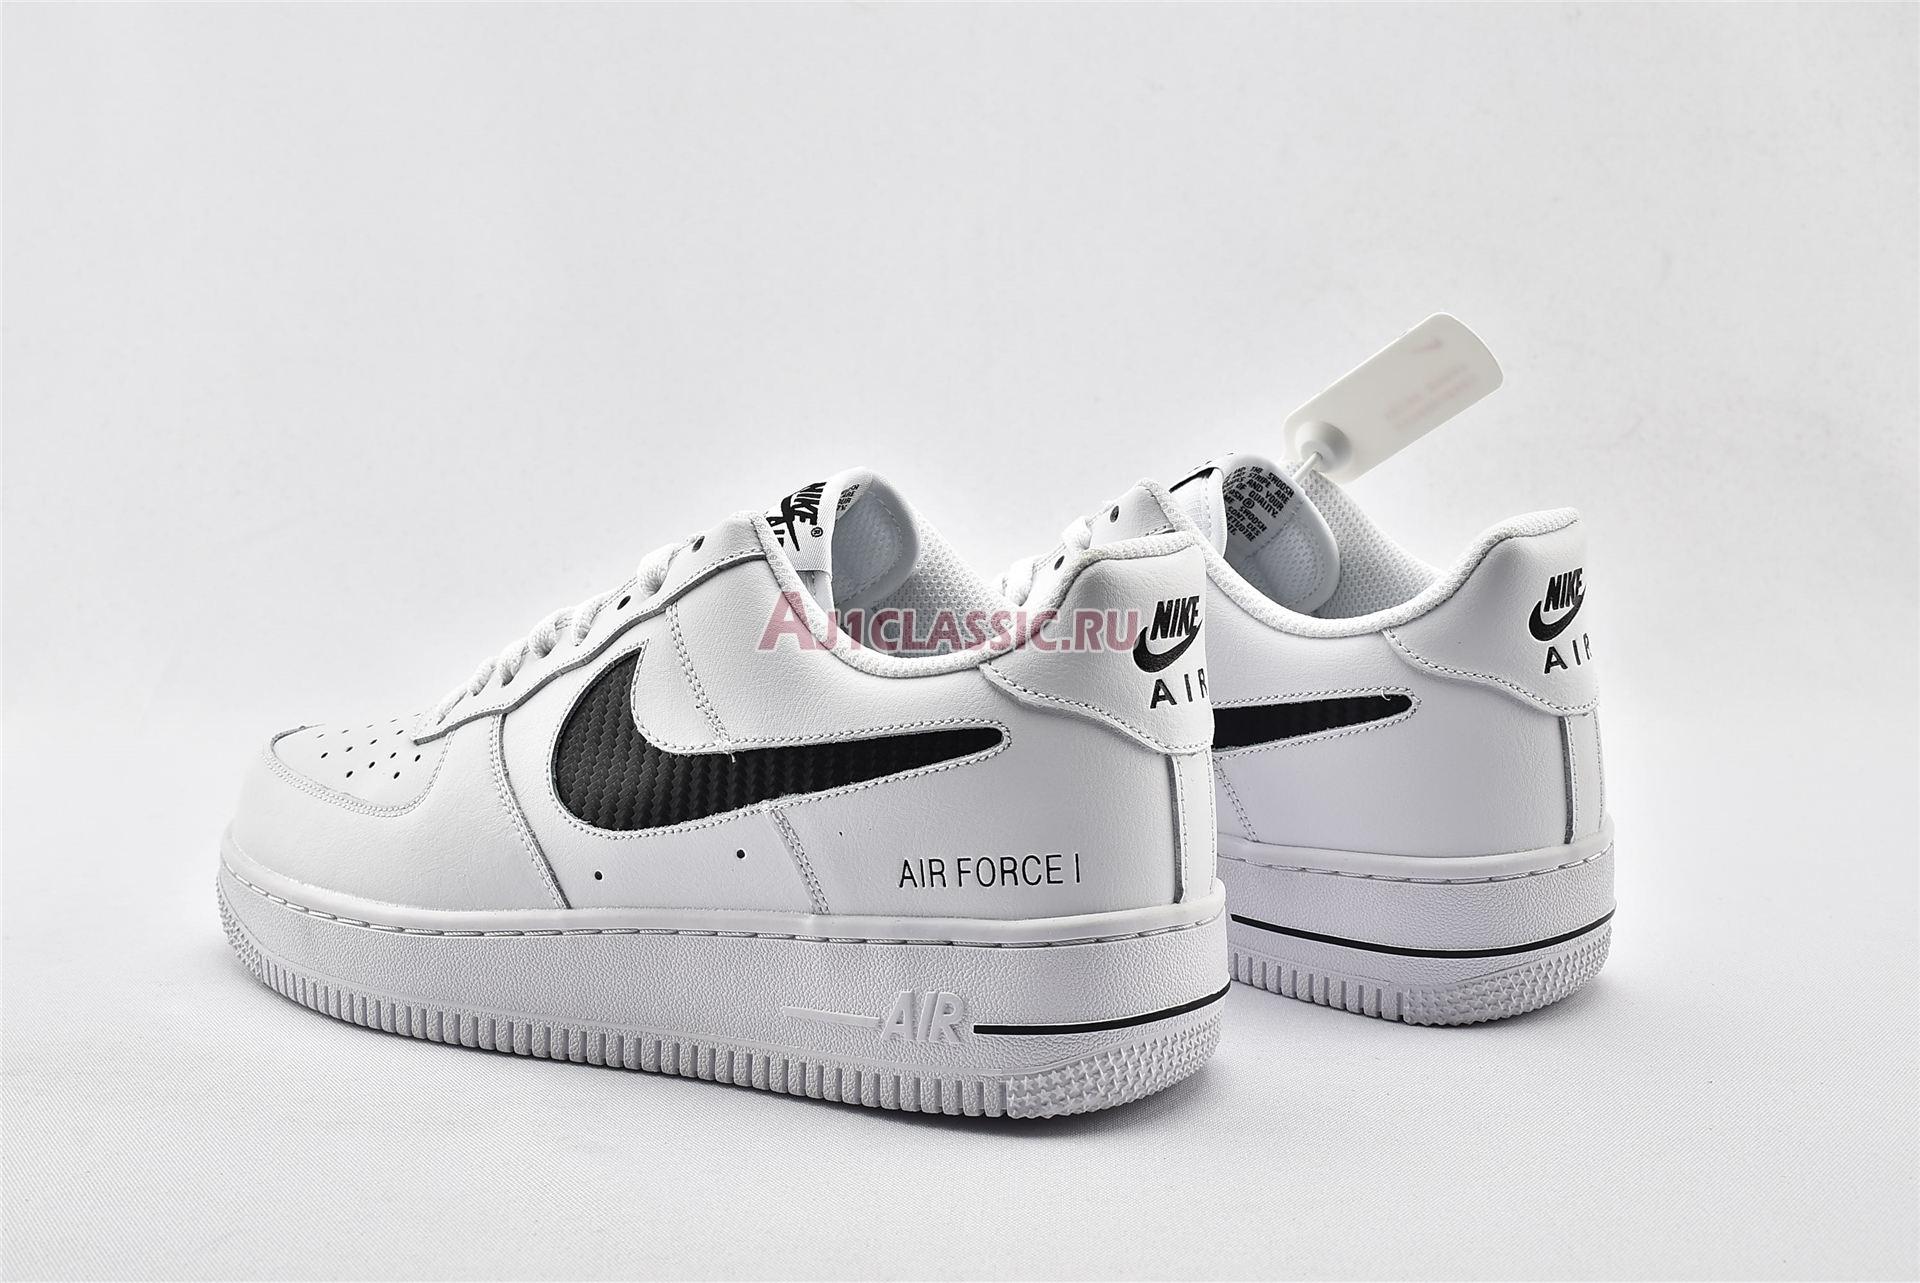 Nike Air Force 1 Low "With Cut-Out " CZ7377-100